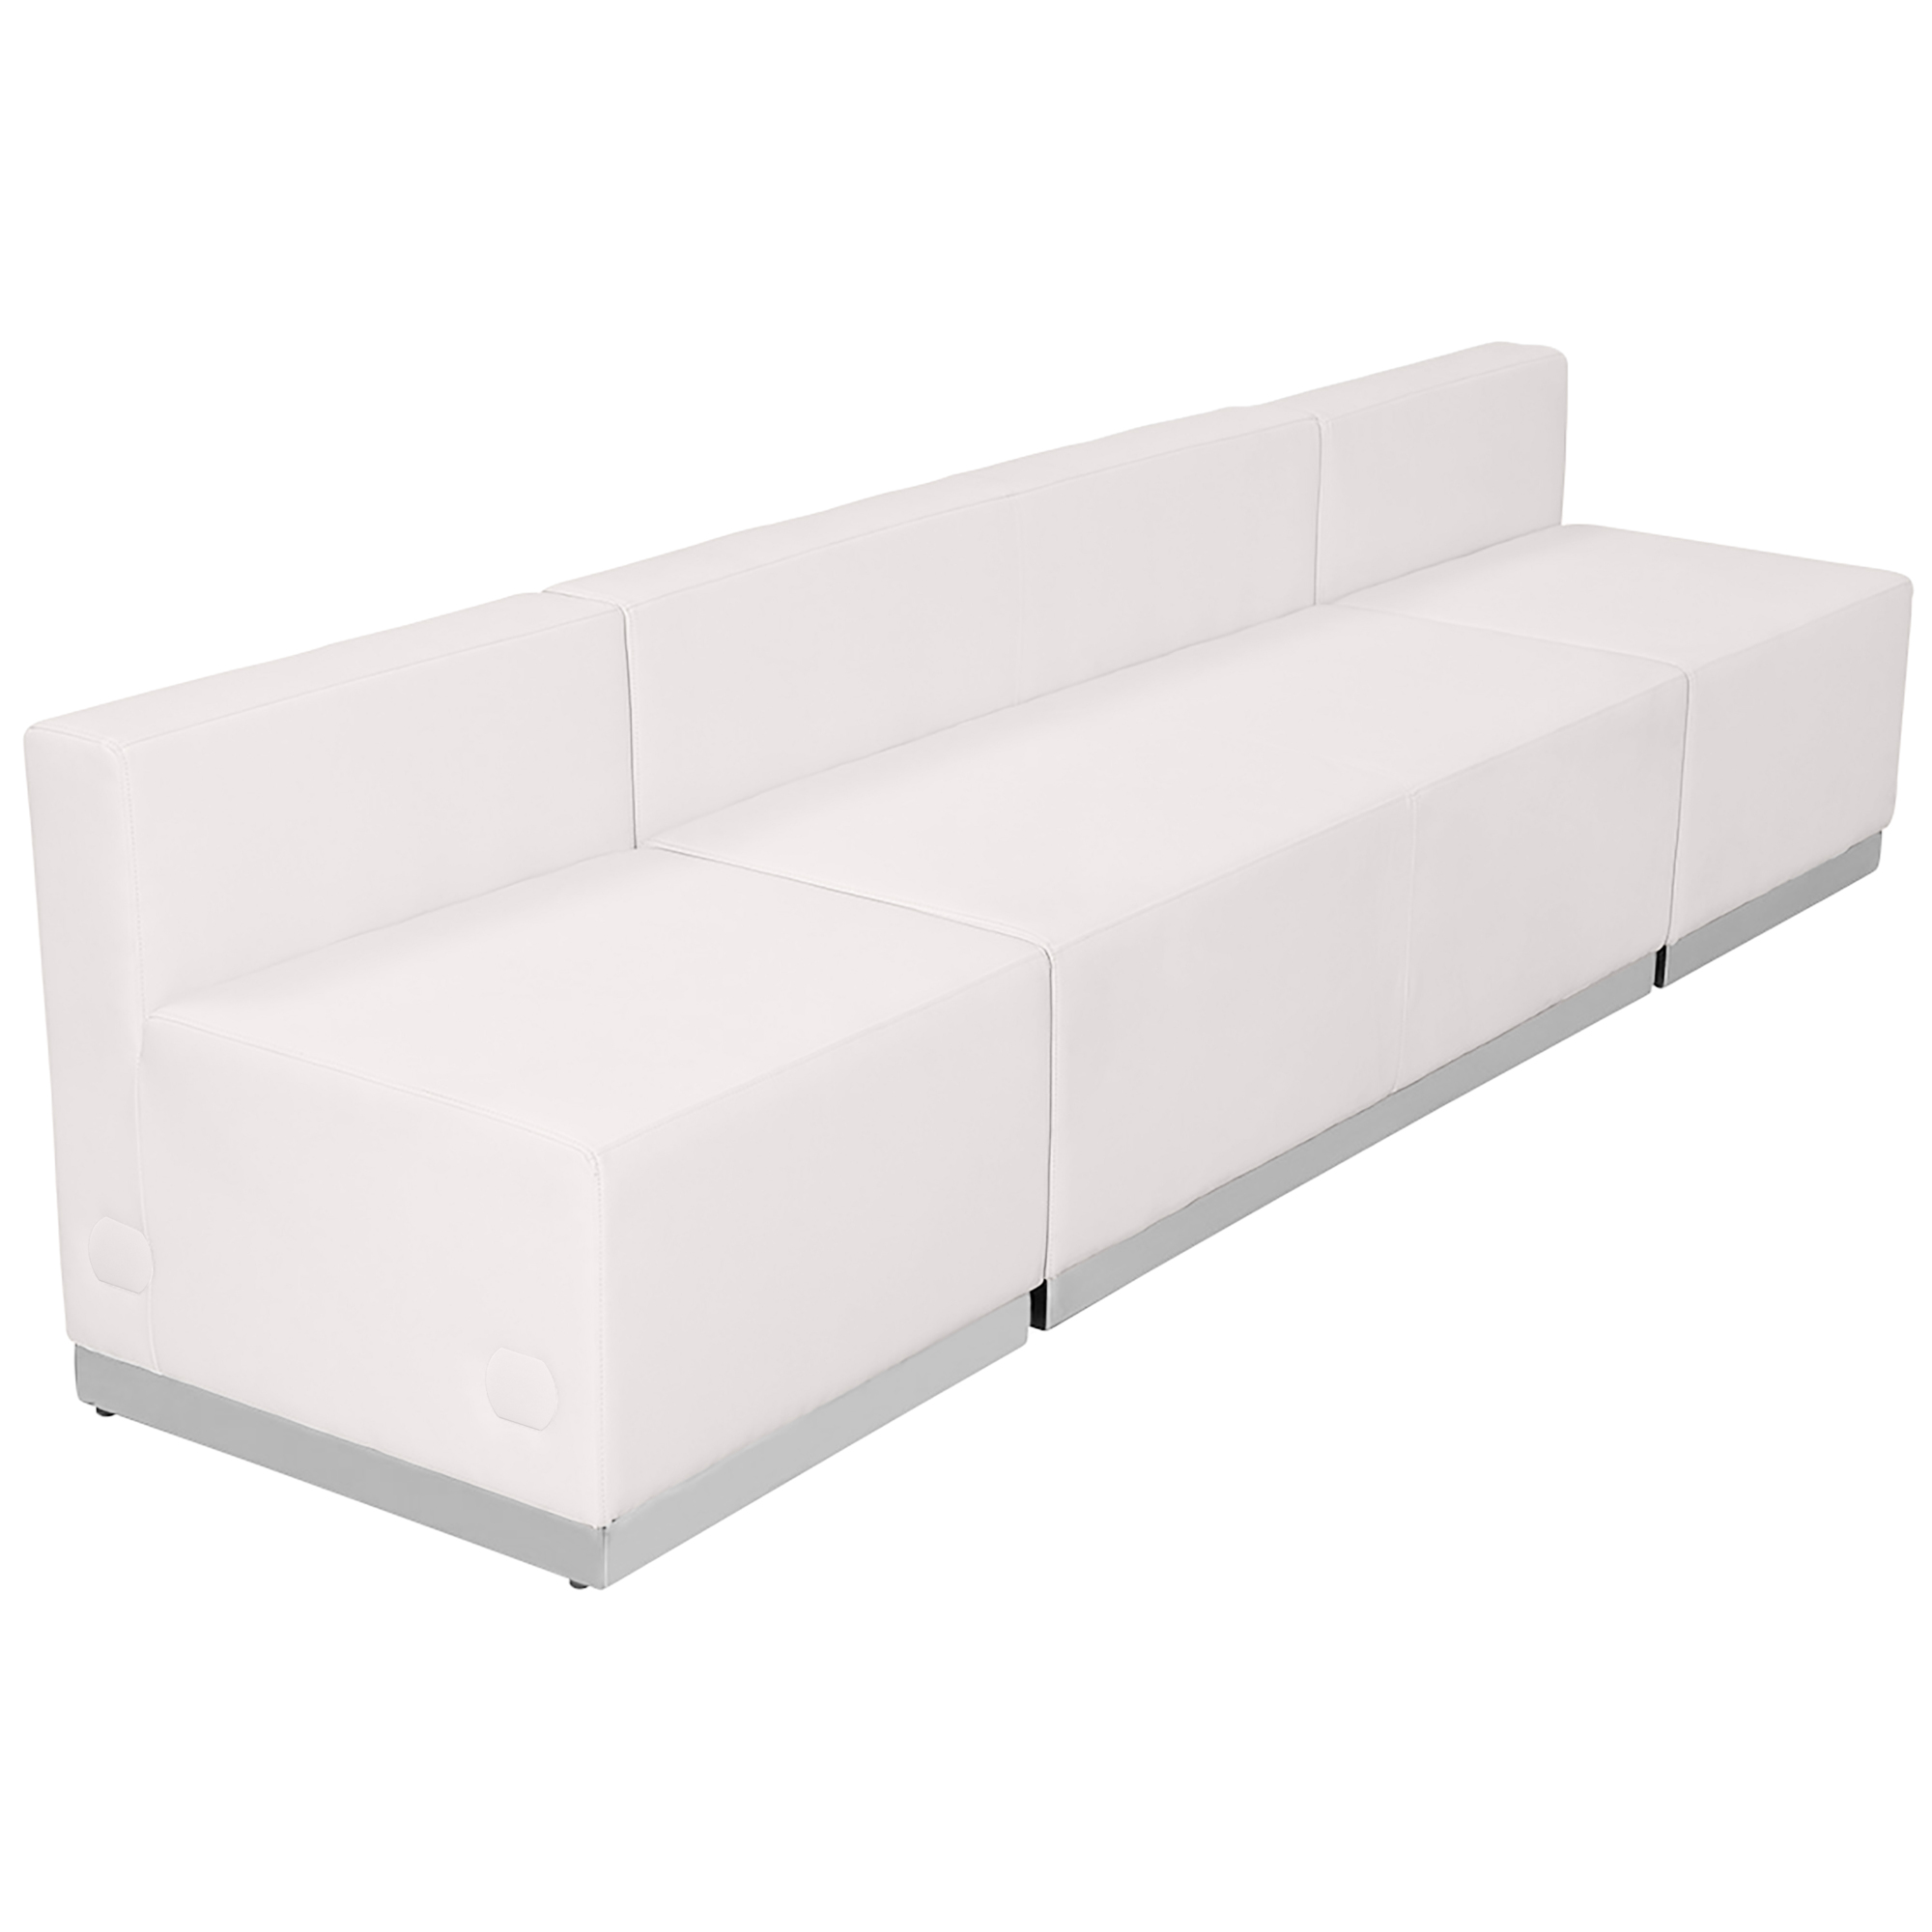 Flash Furniture, 3 PC White LeatherSoft Reception Configuration, Primary Color White, Included (qty.) 3, Model ZB803680SWH